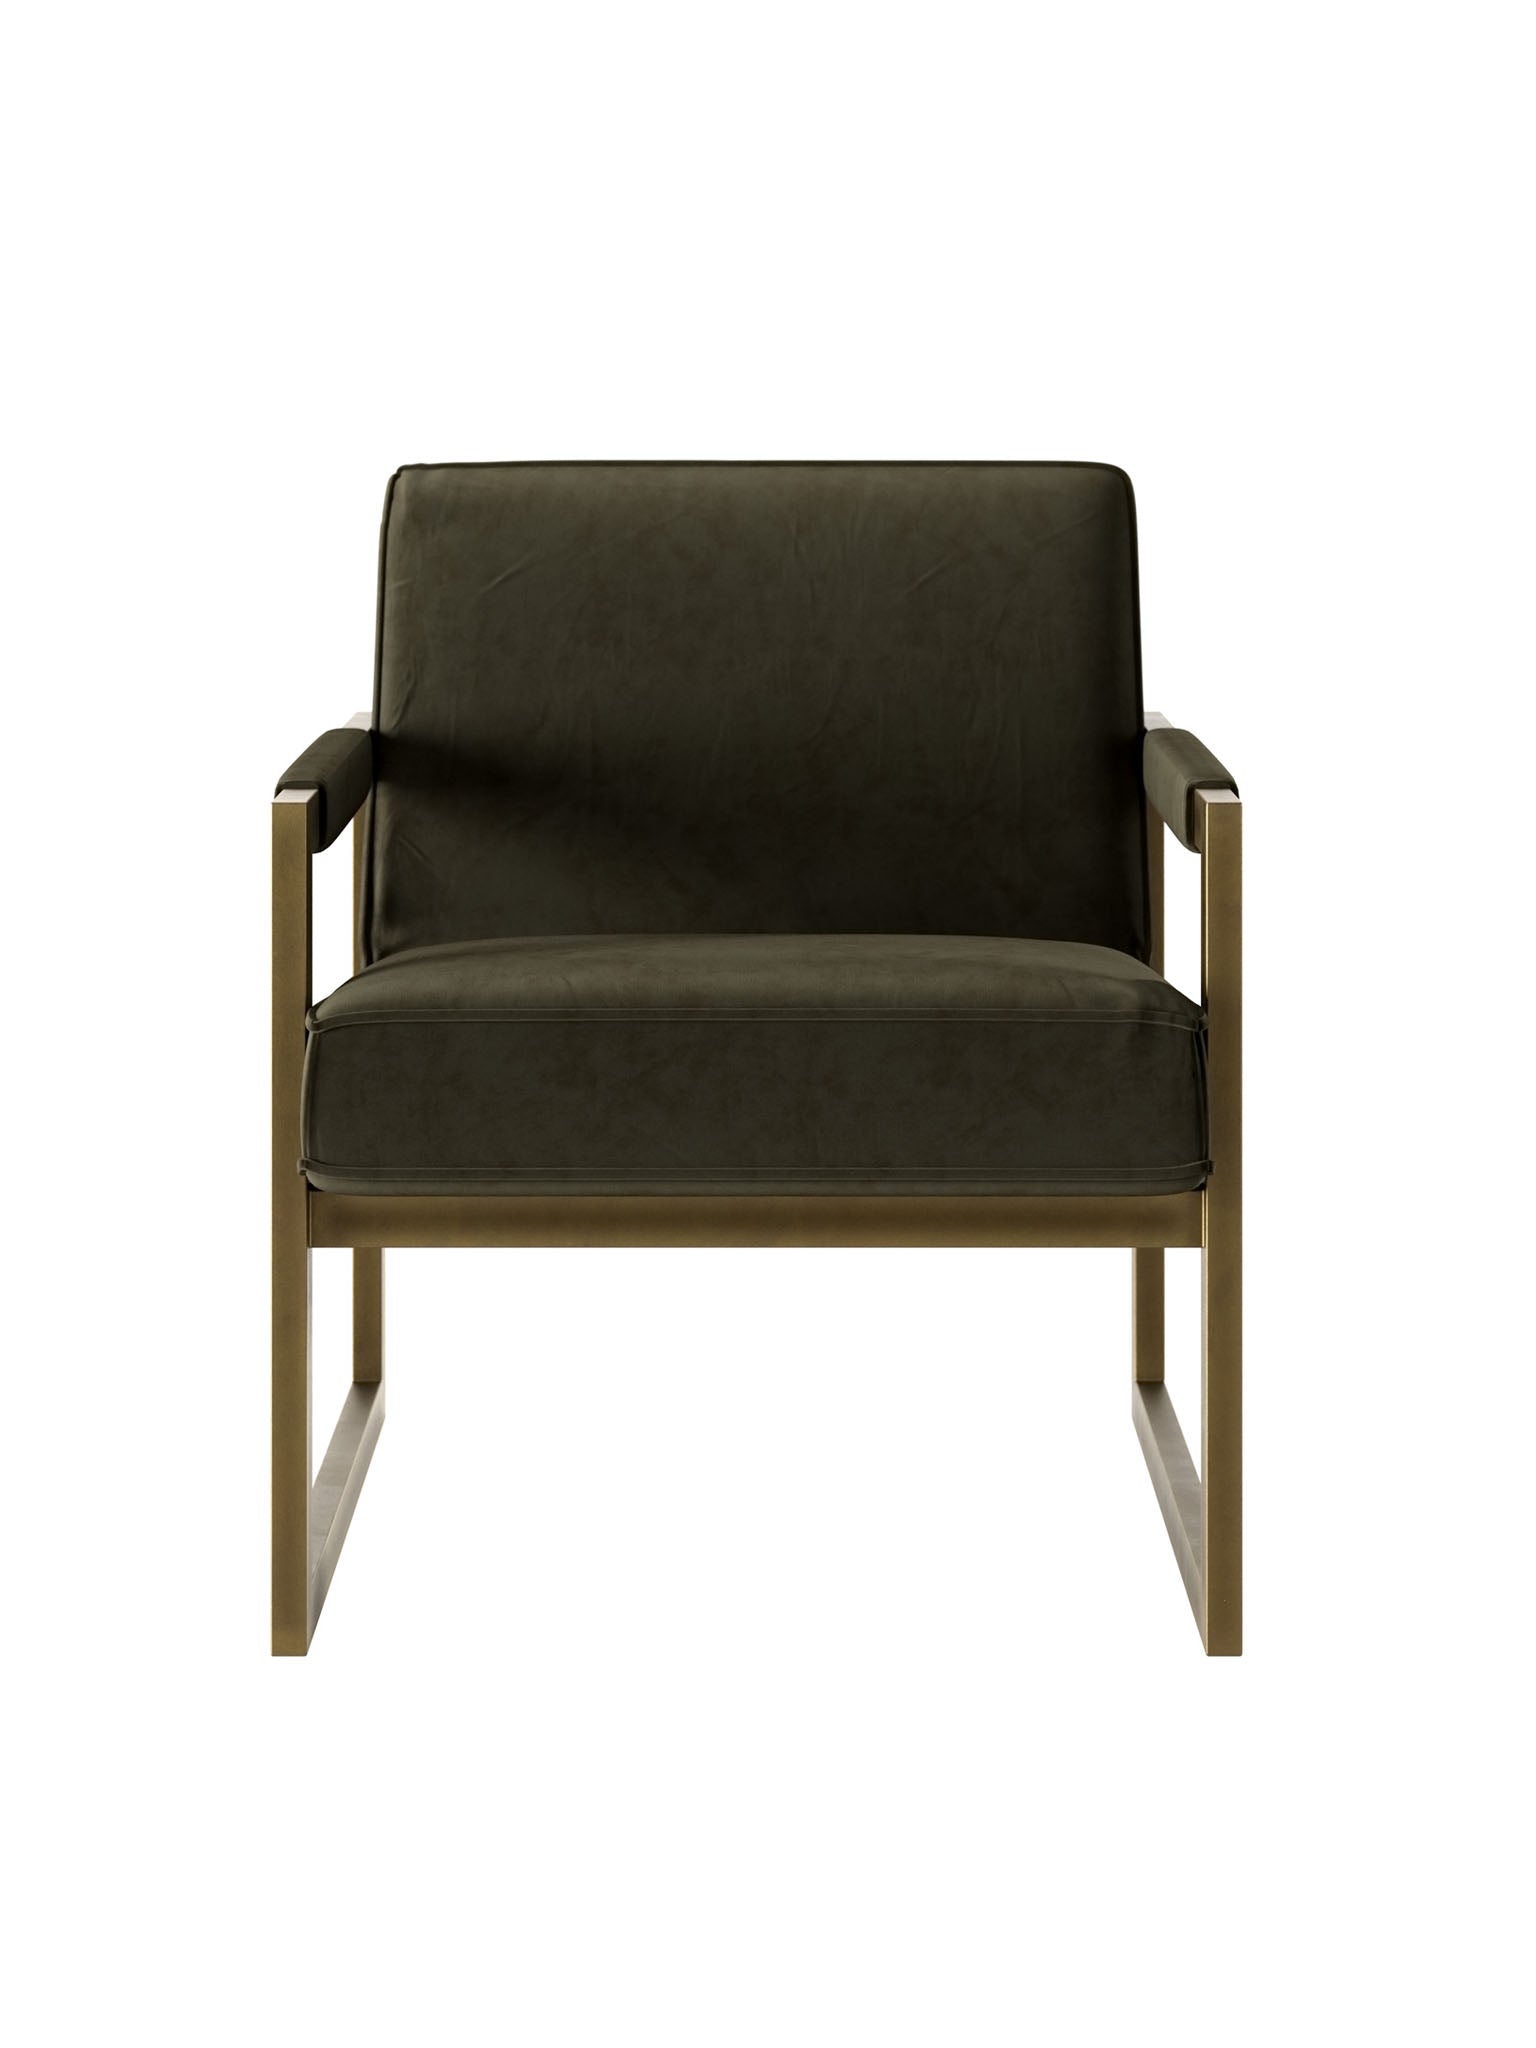  Chenille Armchair with Bronze Accents